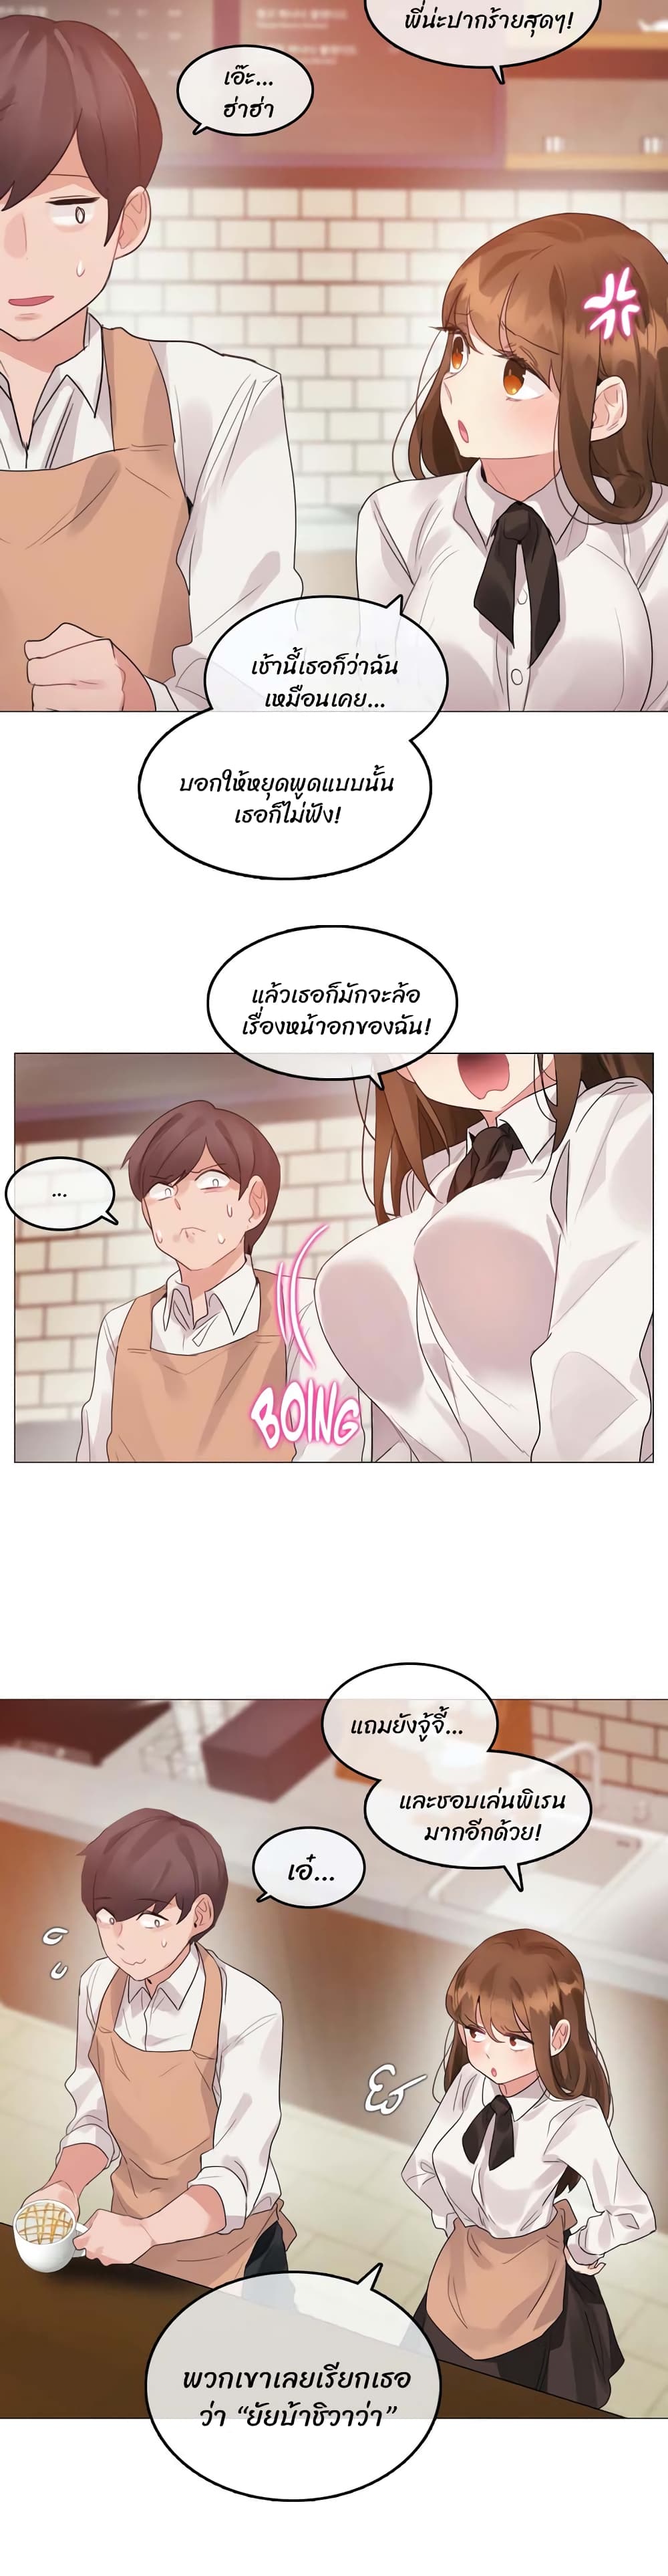 A Pervert's Daily Life 100 (5)